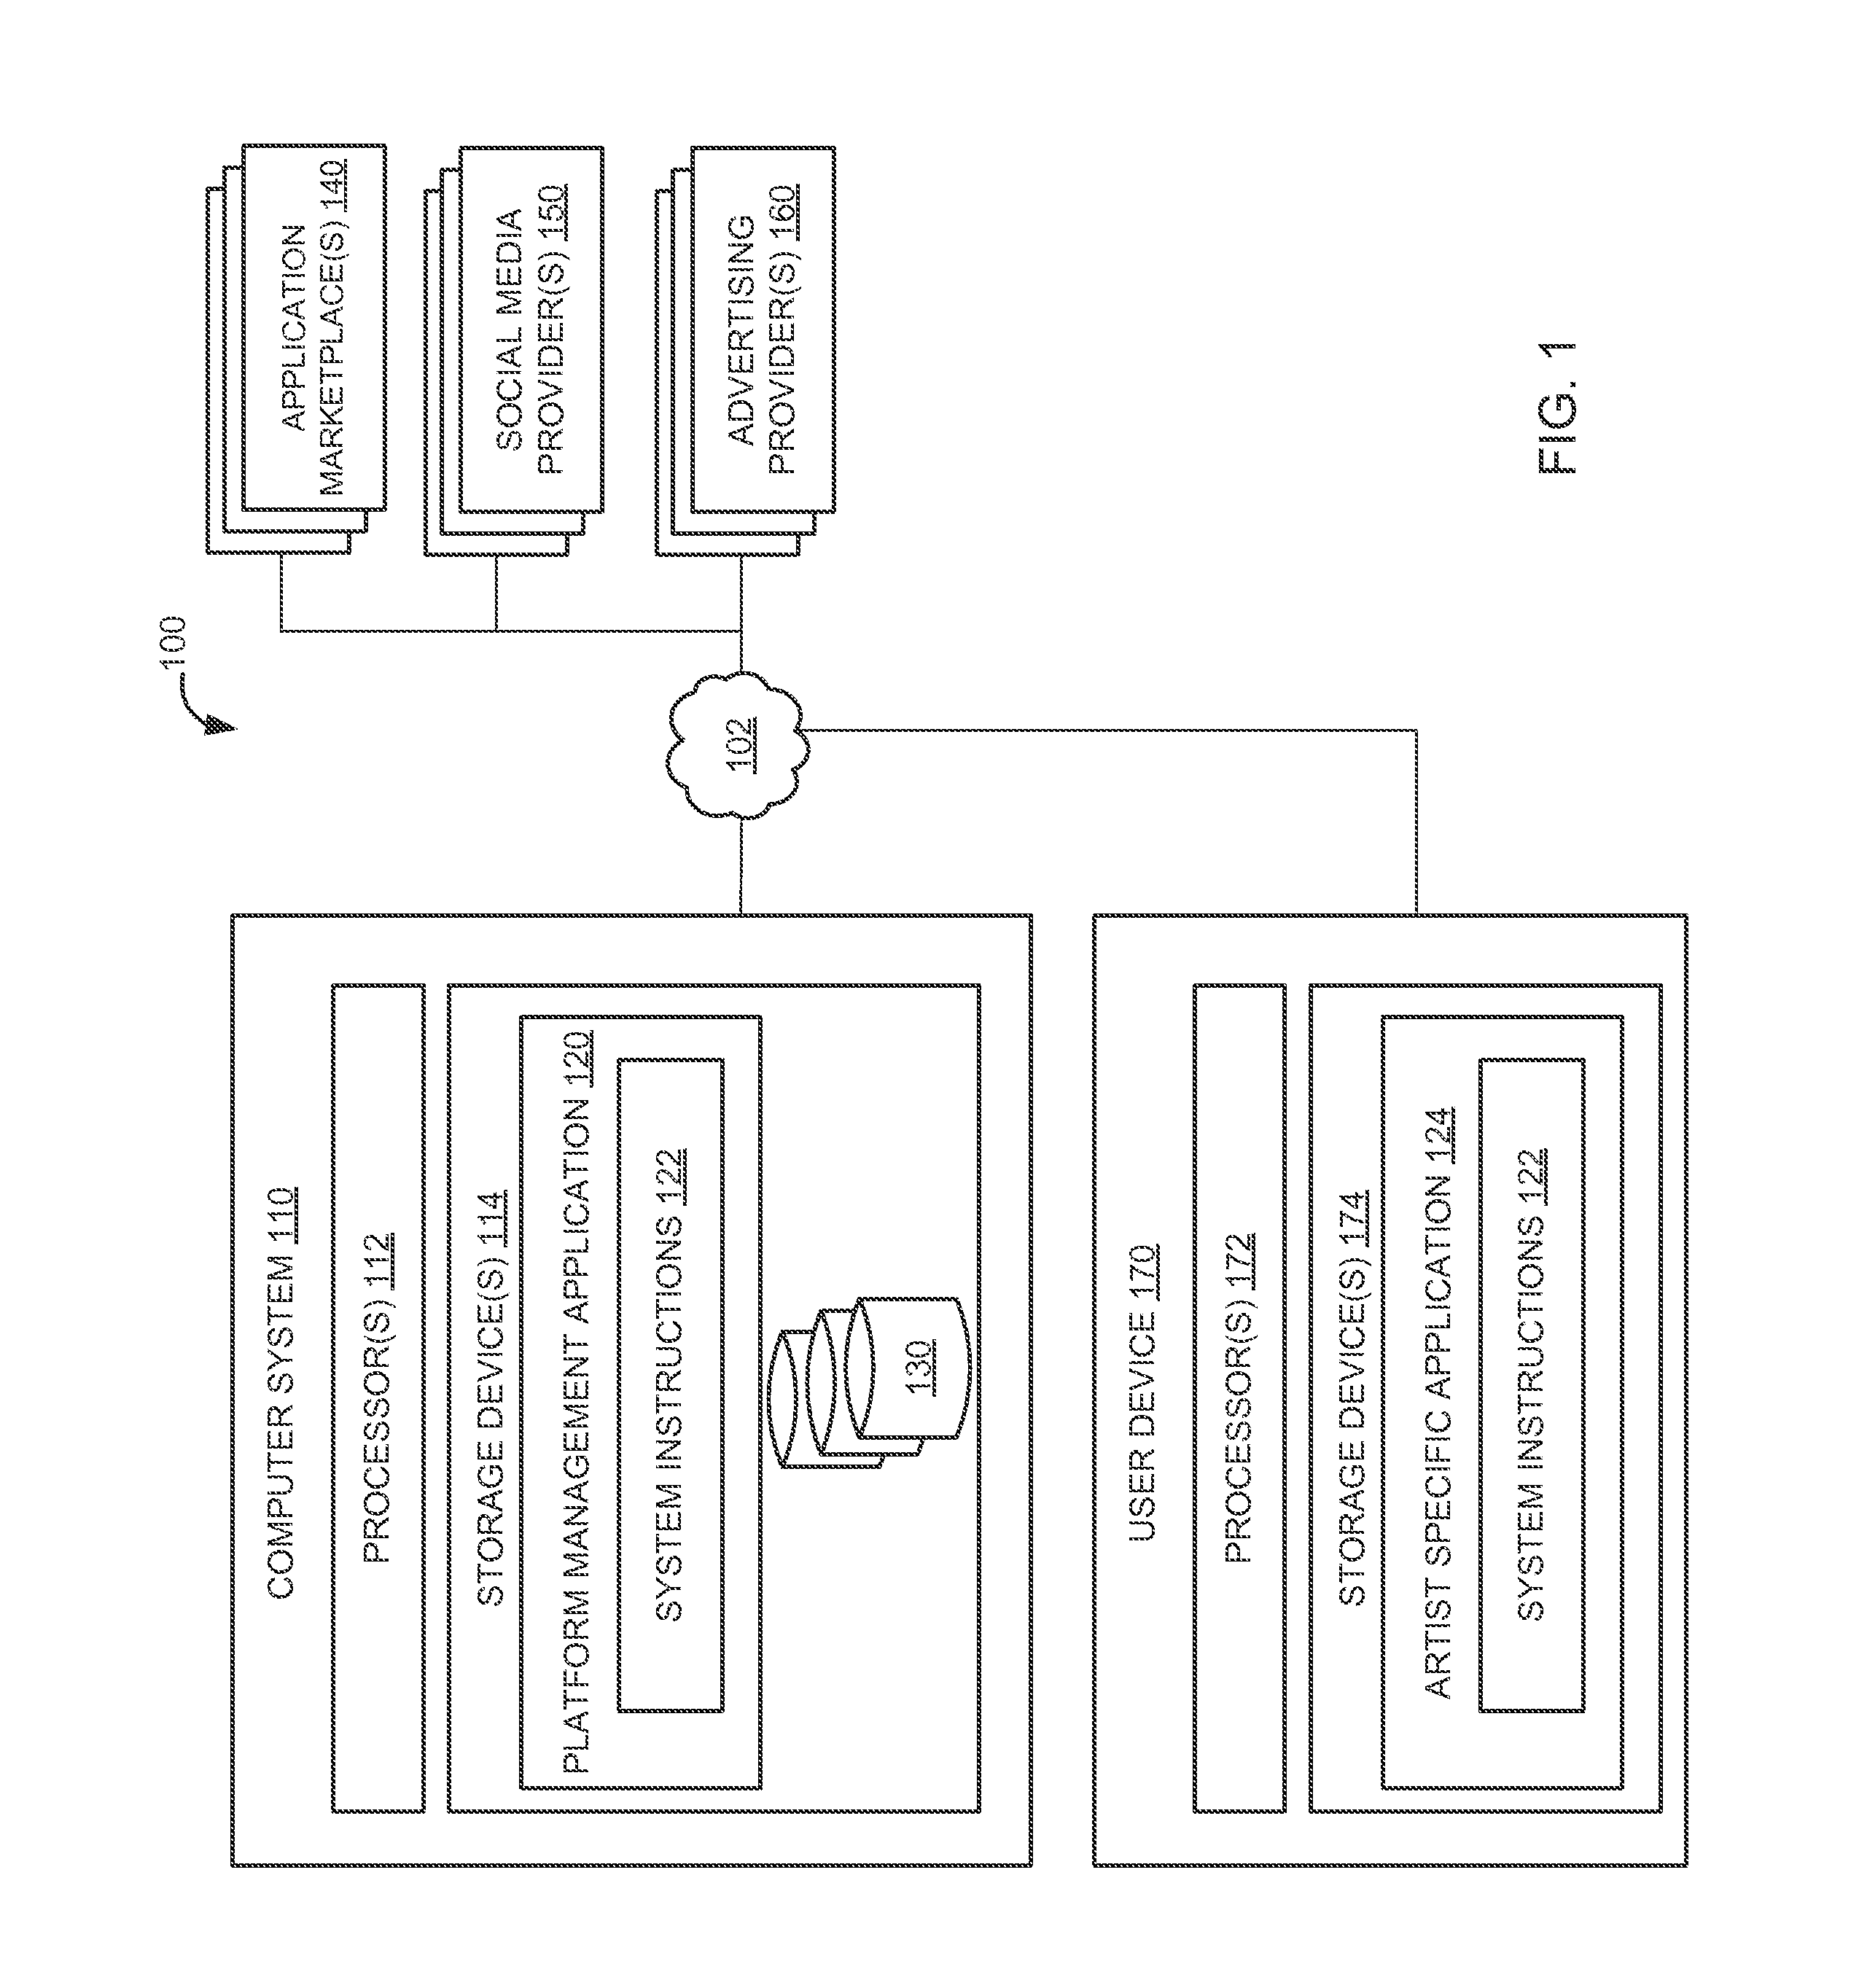 System and method for facilitating cross-application functionality among artist specific client applications